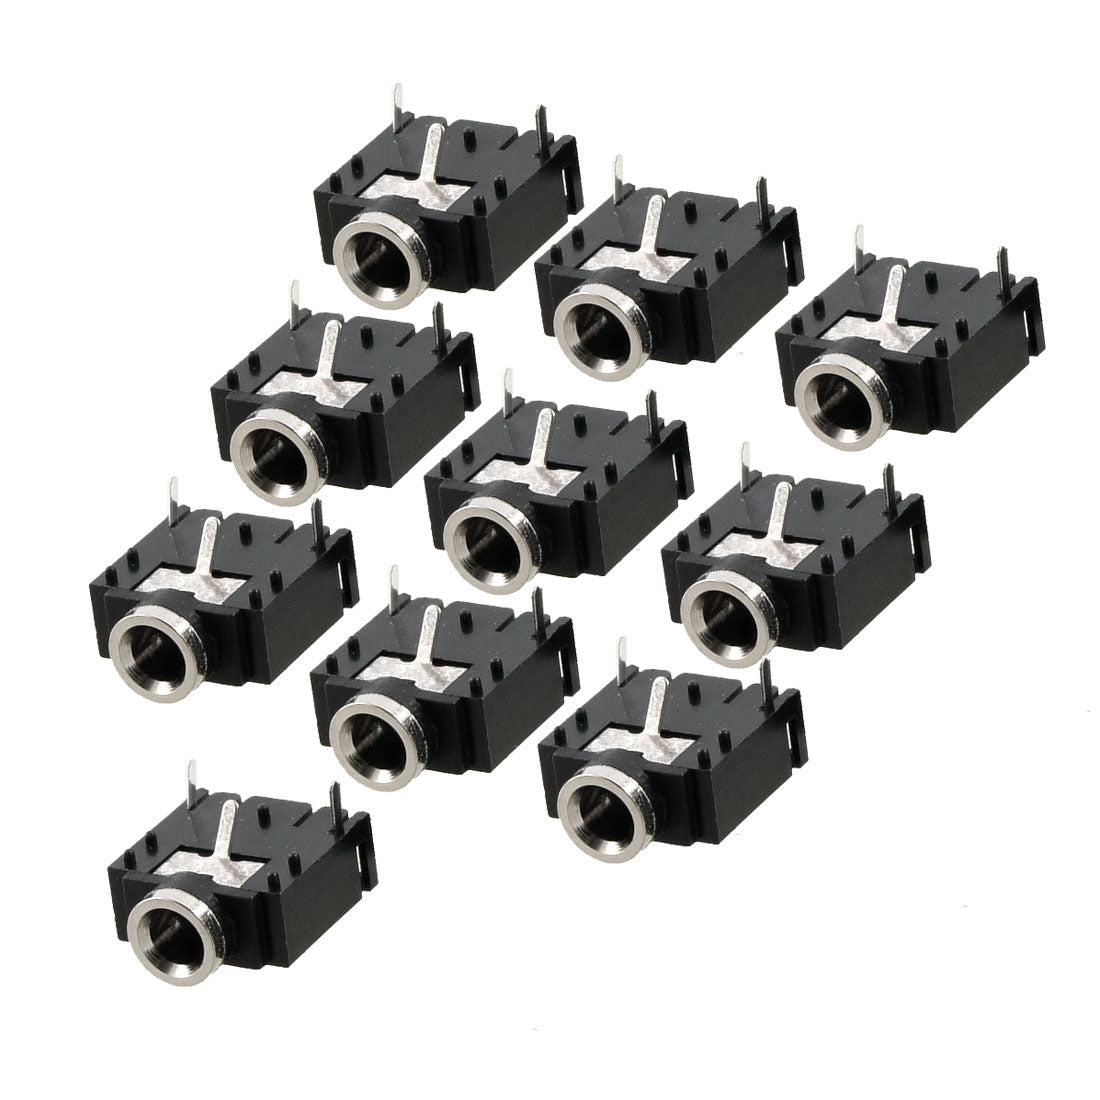 uxcell Uxcell 10 Pcs 3 Terminal PCB Mount Female 3.5mm Stereo Jack Socket Connector